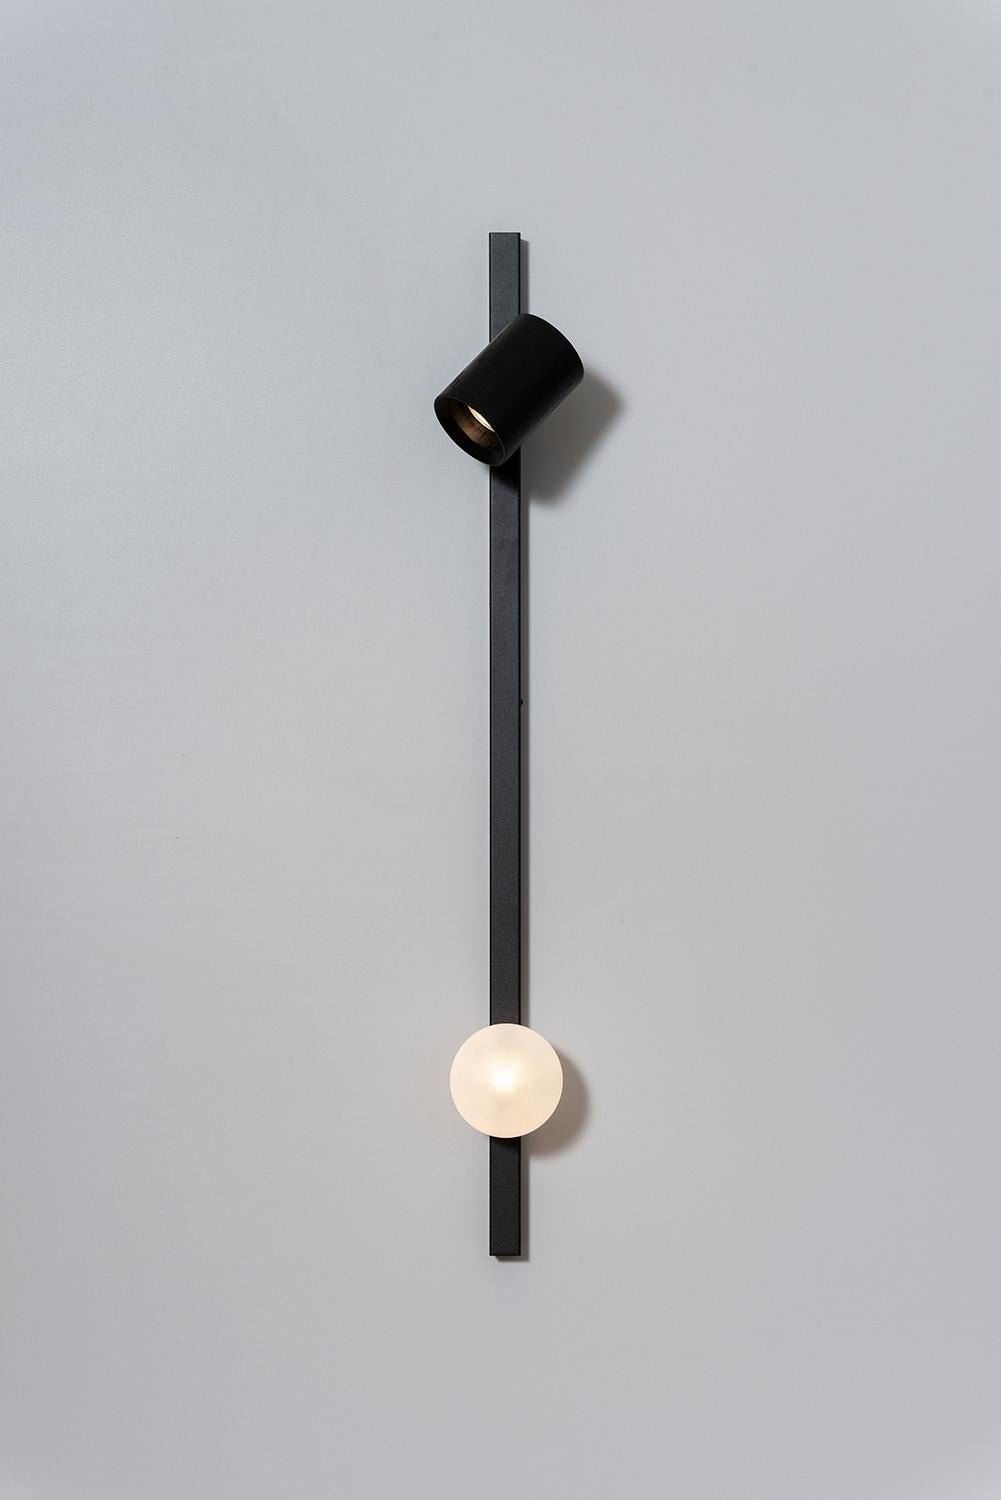 Profile black wall lamp by ASAF Weinbroom Studio
Dimensions: 100 x 10 x 18 cm
Materials: Frosted Glass + Metal + Wood

Wattage / Type socket: 7W Max + 7w Max Led / 10.GU + G9
ASAF WEINBROOM studio was established in 2009.

All our lamps can